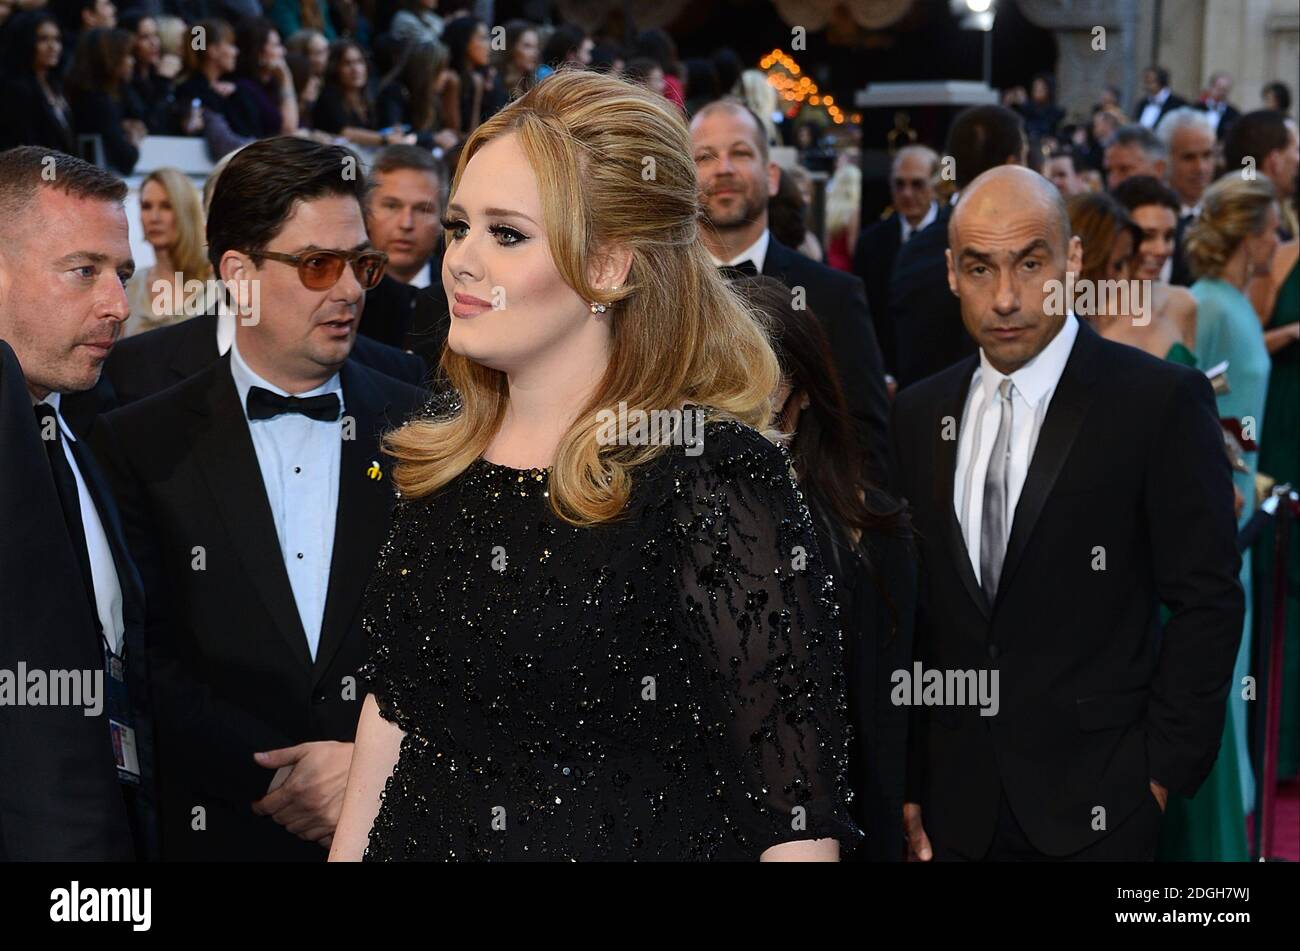 Adele Adkins arriving for the 85th Academy Awards at the Dolby Theatre, Los Angeles. Stock Photo